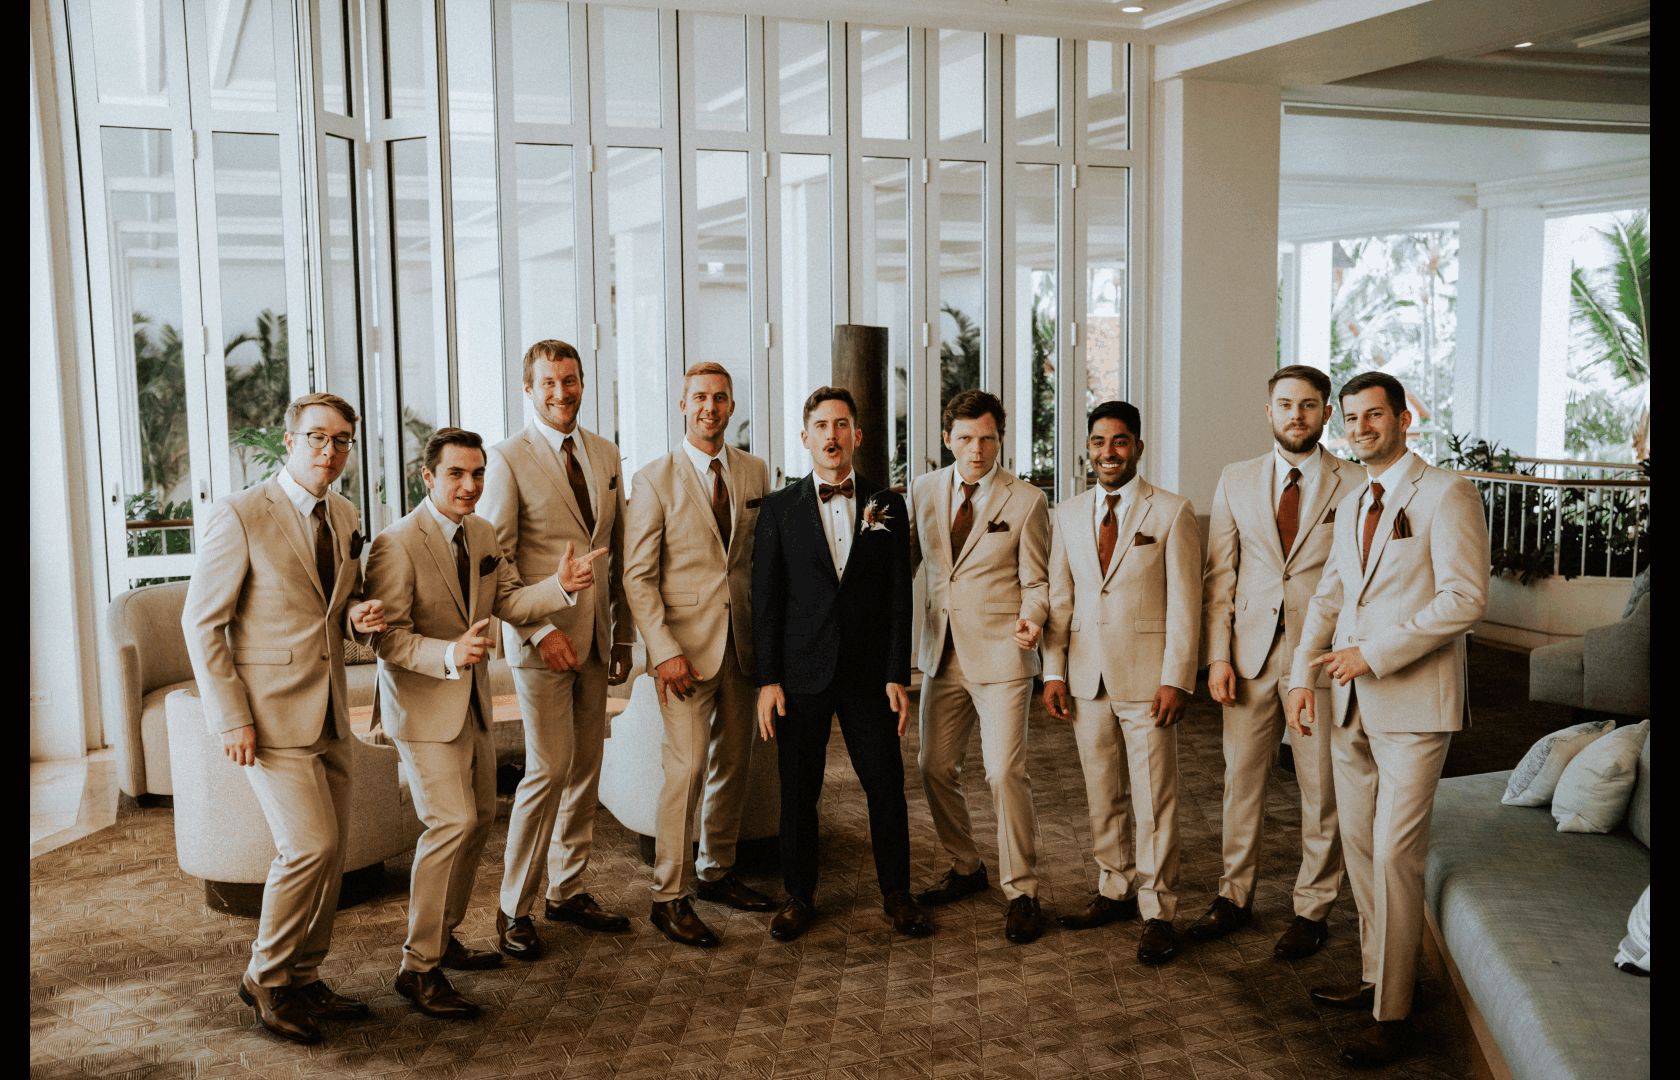 Groomsmen and Groom showing off that they can dance better than the bridesmaids